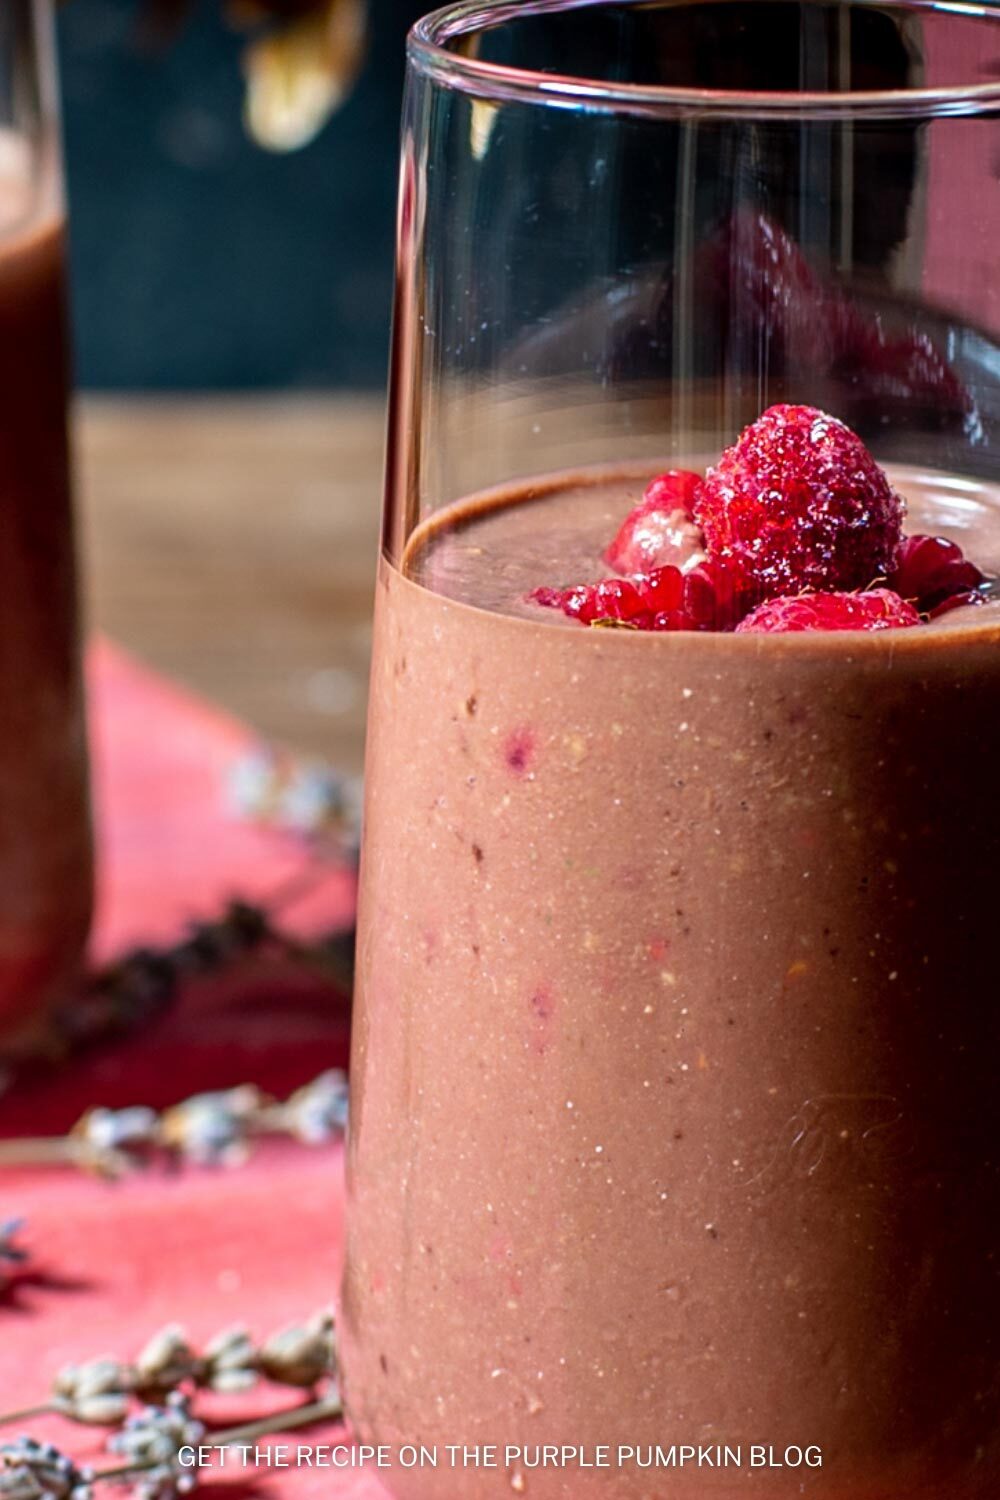 A Recipe for Low Carb Chocolate Smoothies